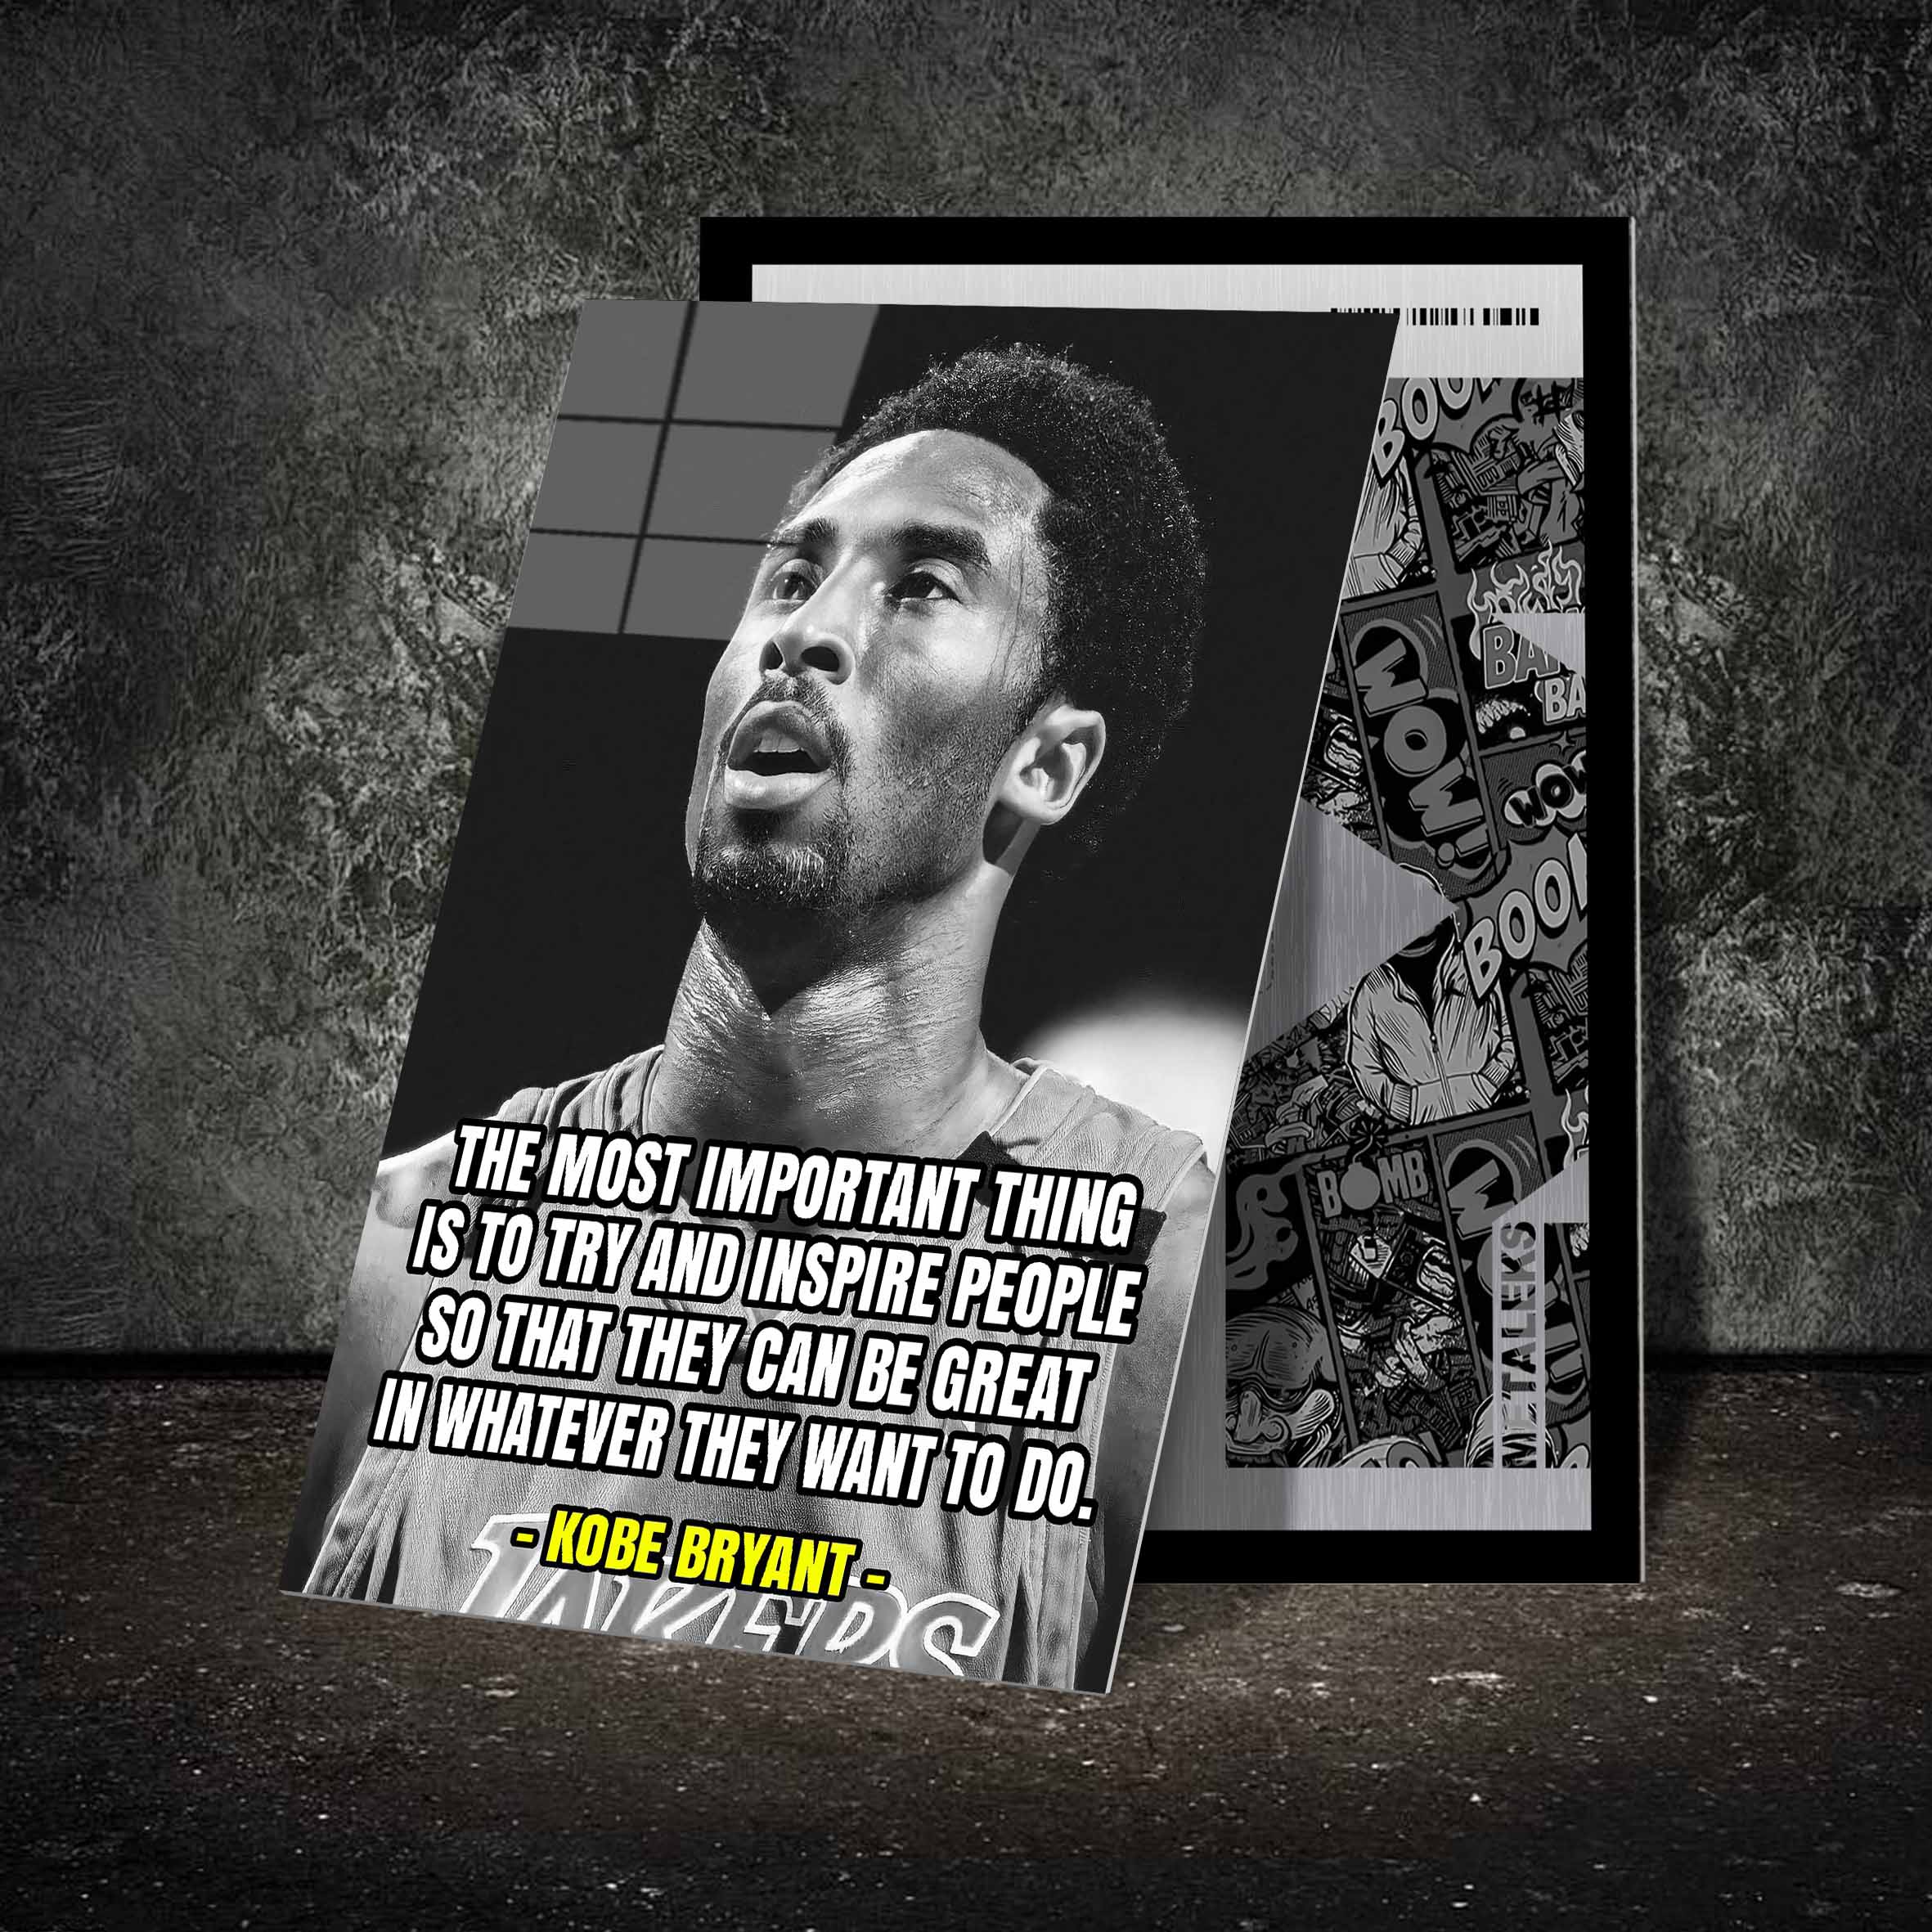 Kobe Bryant Quotes (1)-designed by @Angry Illustration